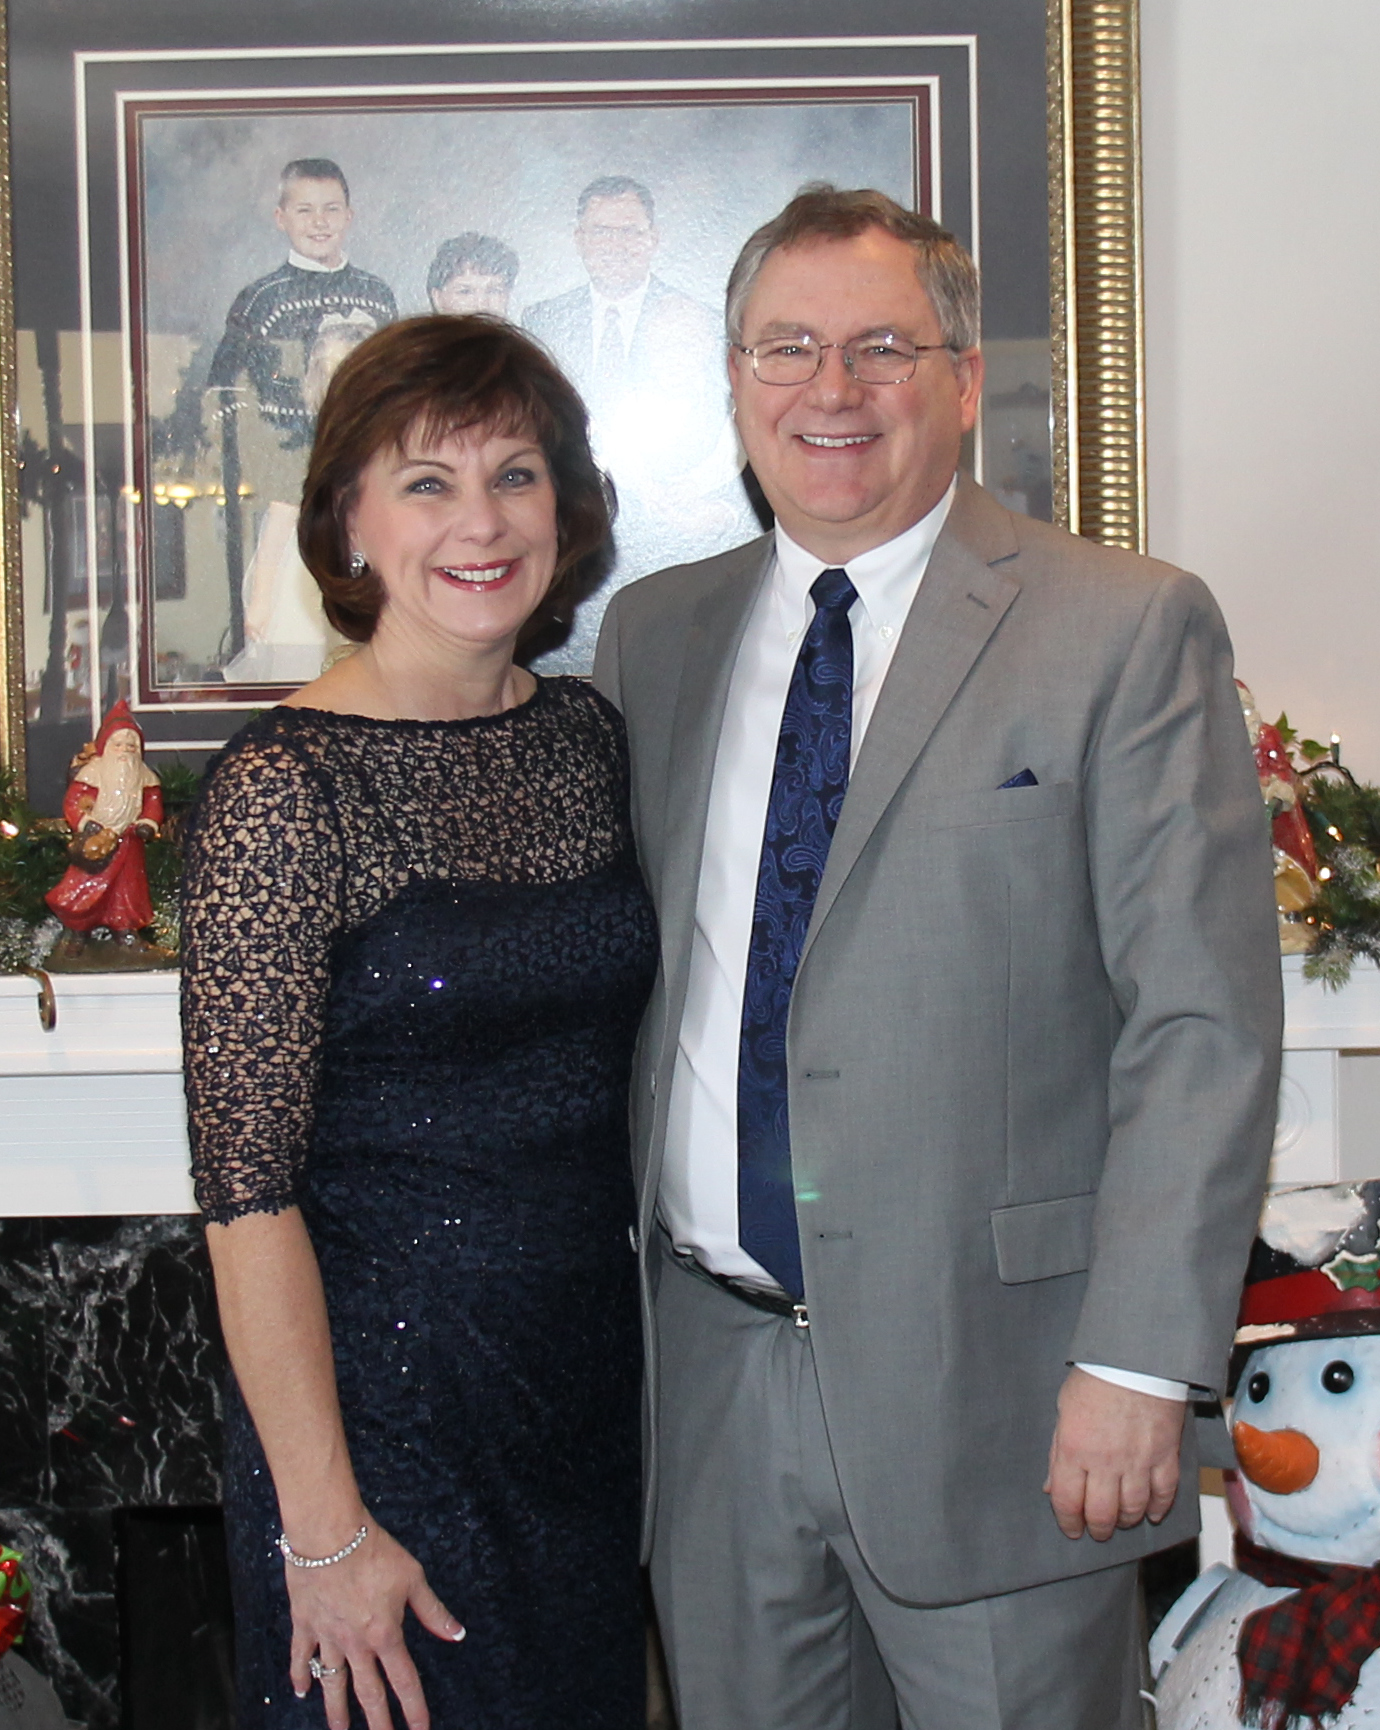 Mark Carr and his wife Mary Beth